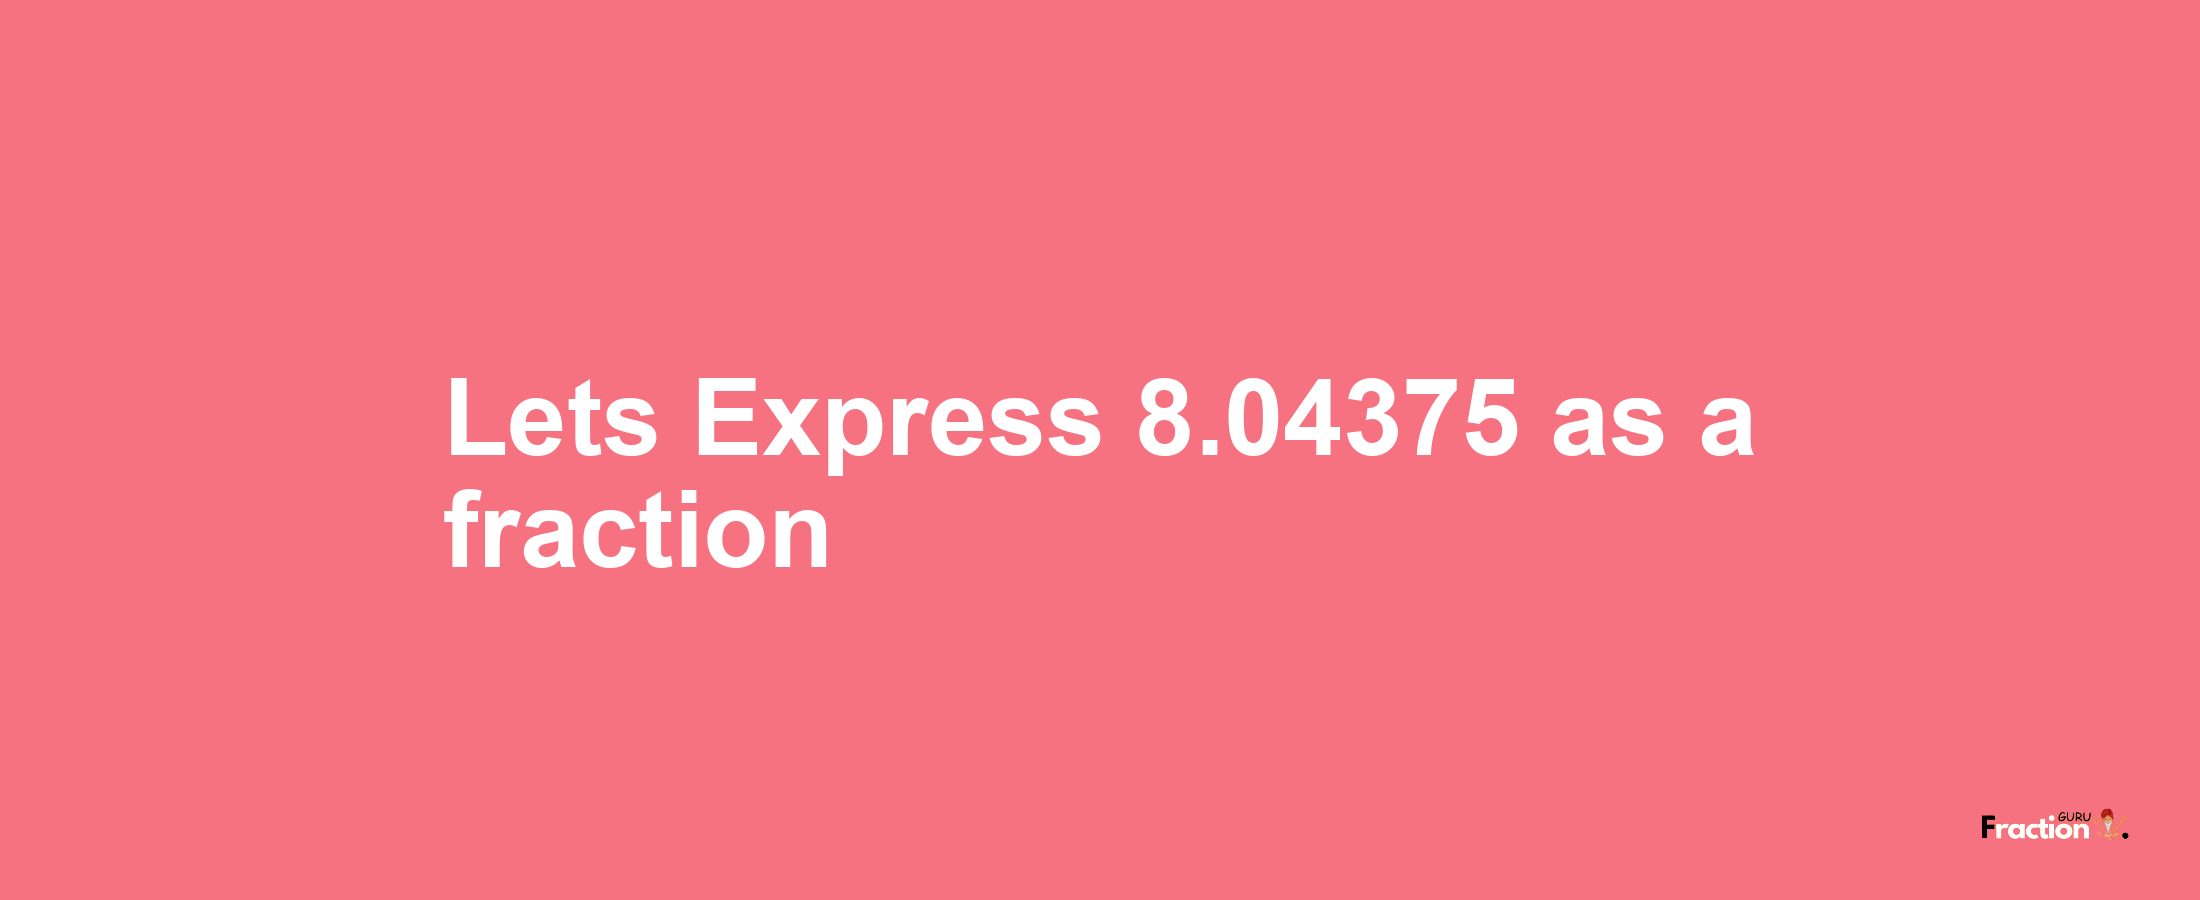 Lets Express 8.04375 as afraction